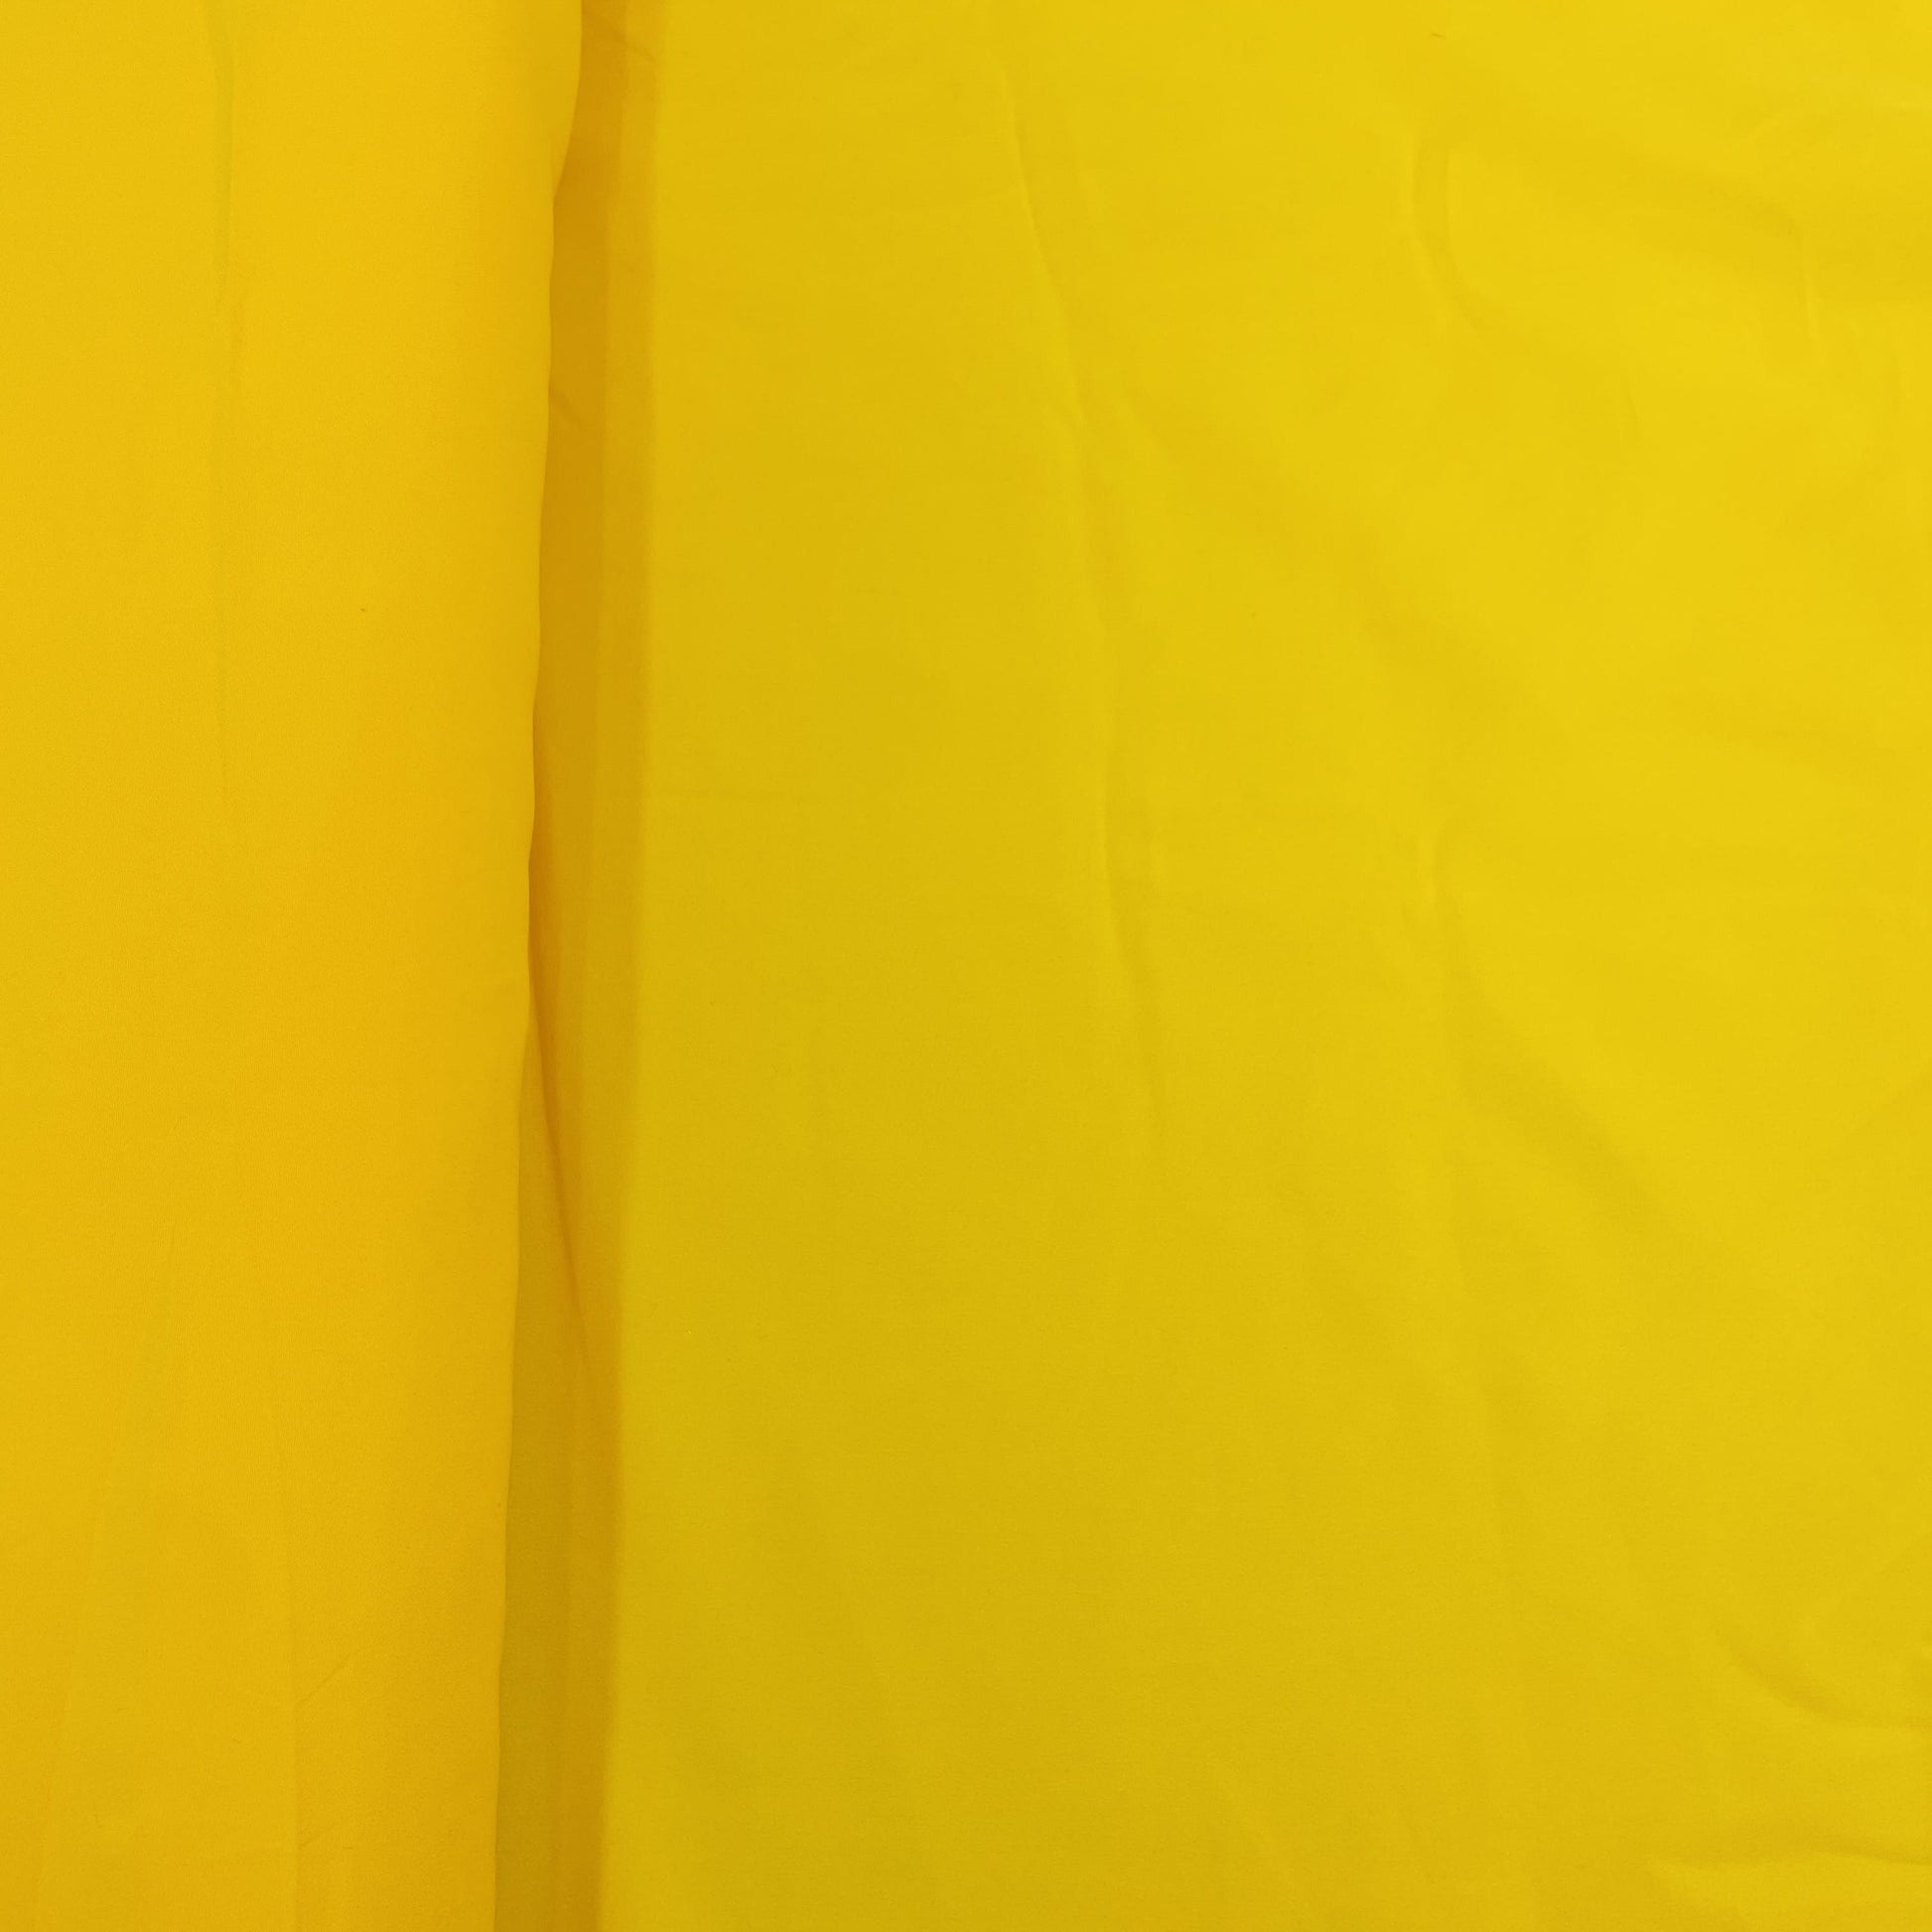 Exclusive Bright Yellow Solid Malai Crepe Fabric